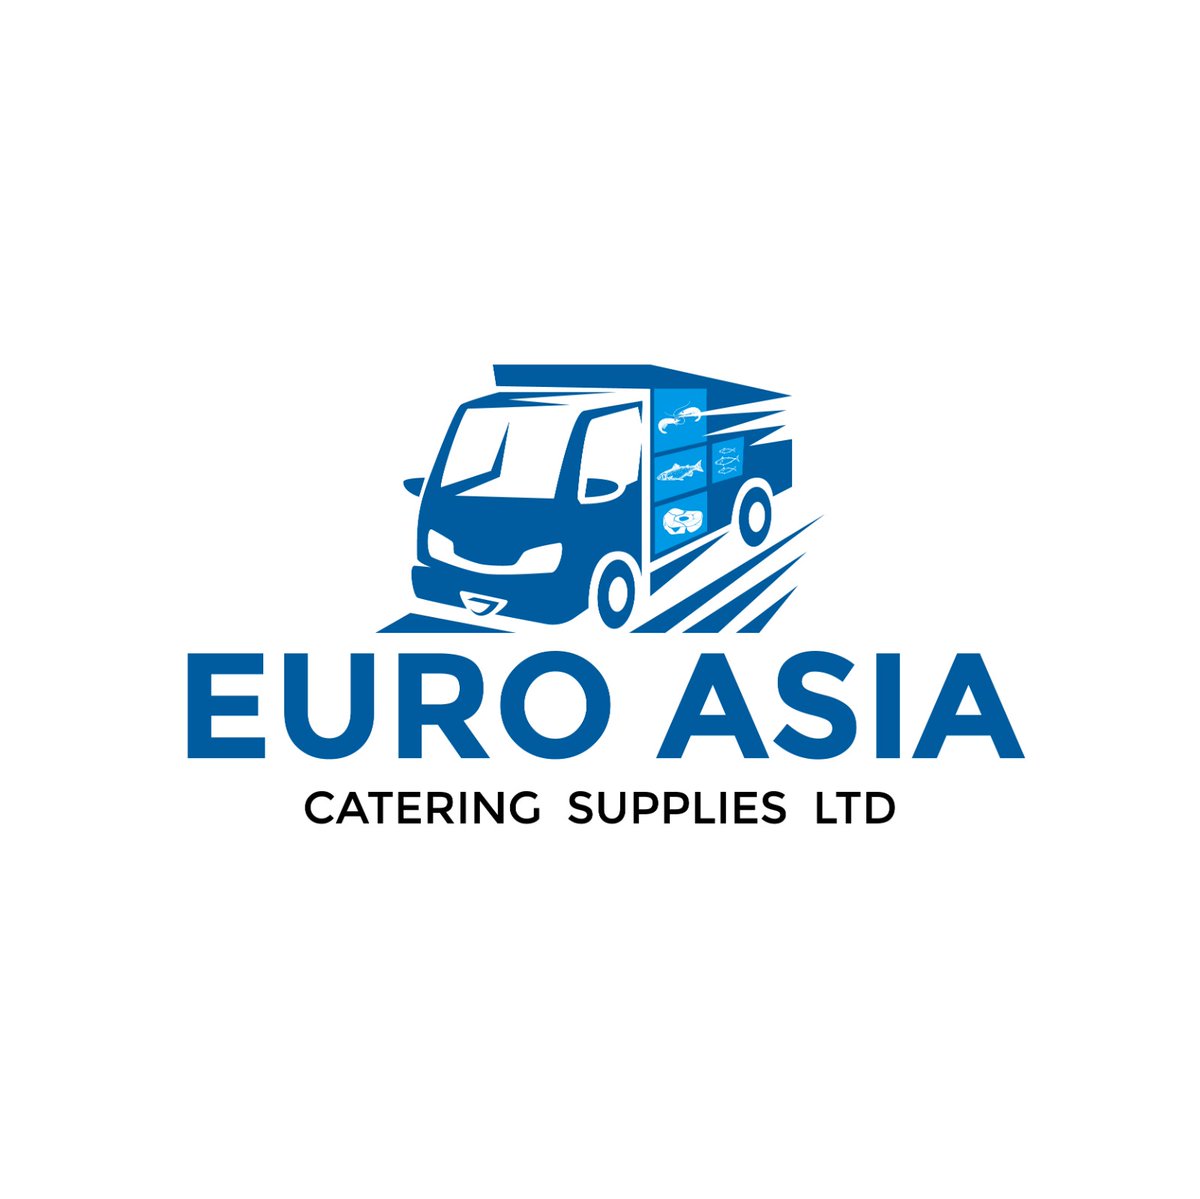 A massive thank you to EuroAsia Catering Supplies for being a Silver Sponsor for our Afternoon Tea Event. Thank you for your support and contributions to help the Curry Kitchen which feeds over 100 people every Friday. To get involved please email: mostaque@barthamgroup.com